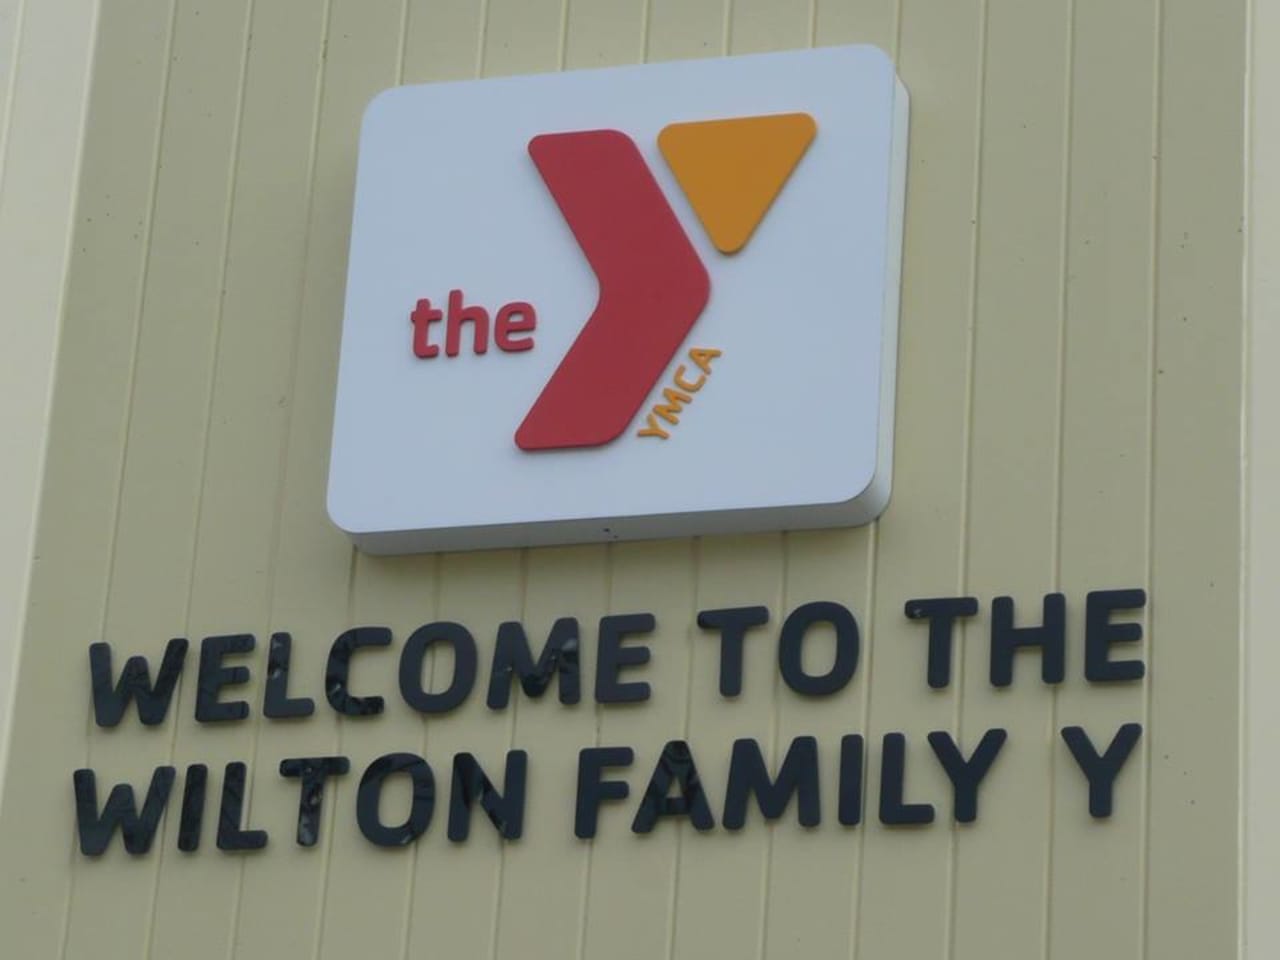 The Wilton Family Y is inviting moms to join a new class on resume writing. 